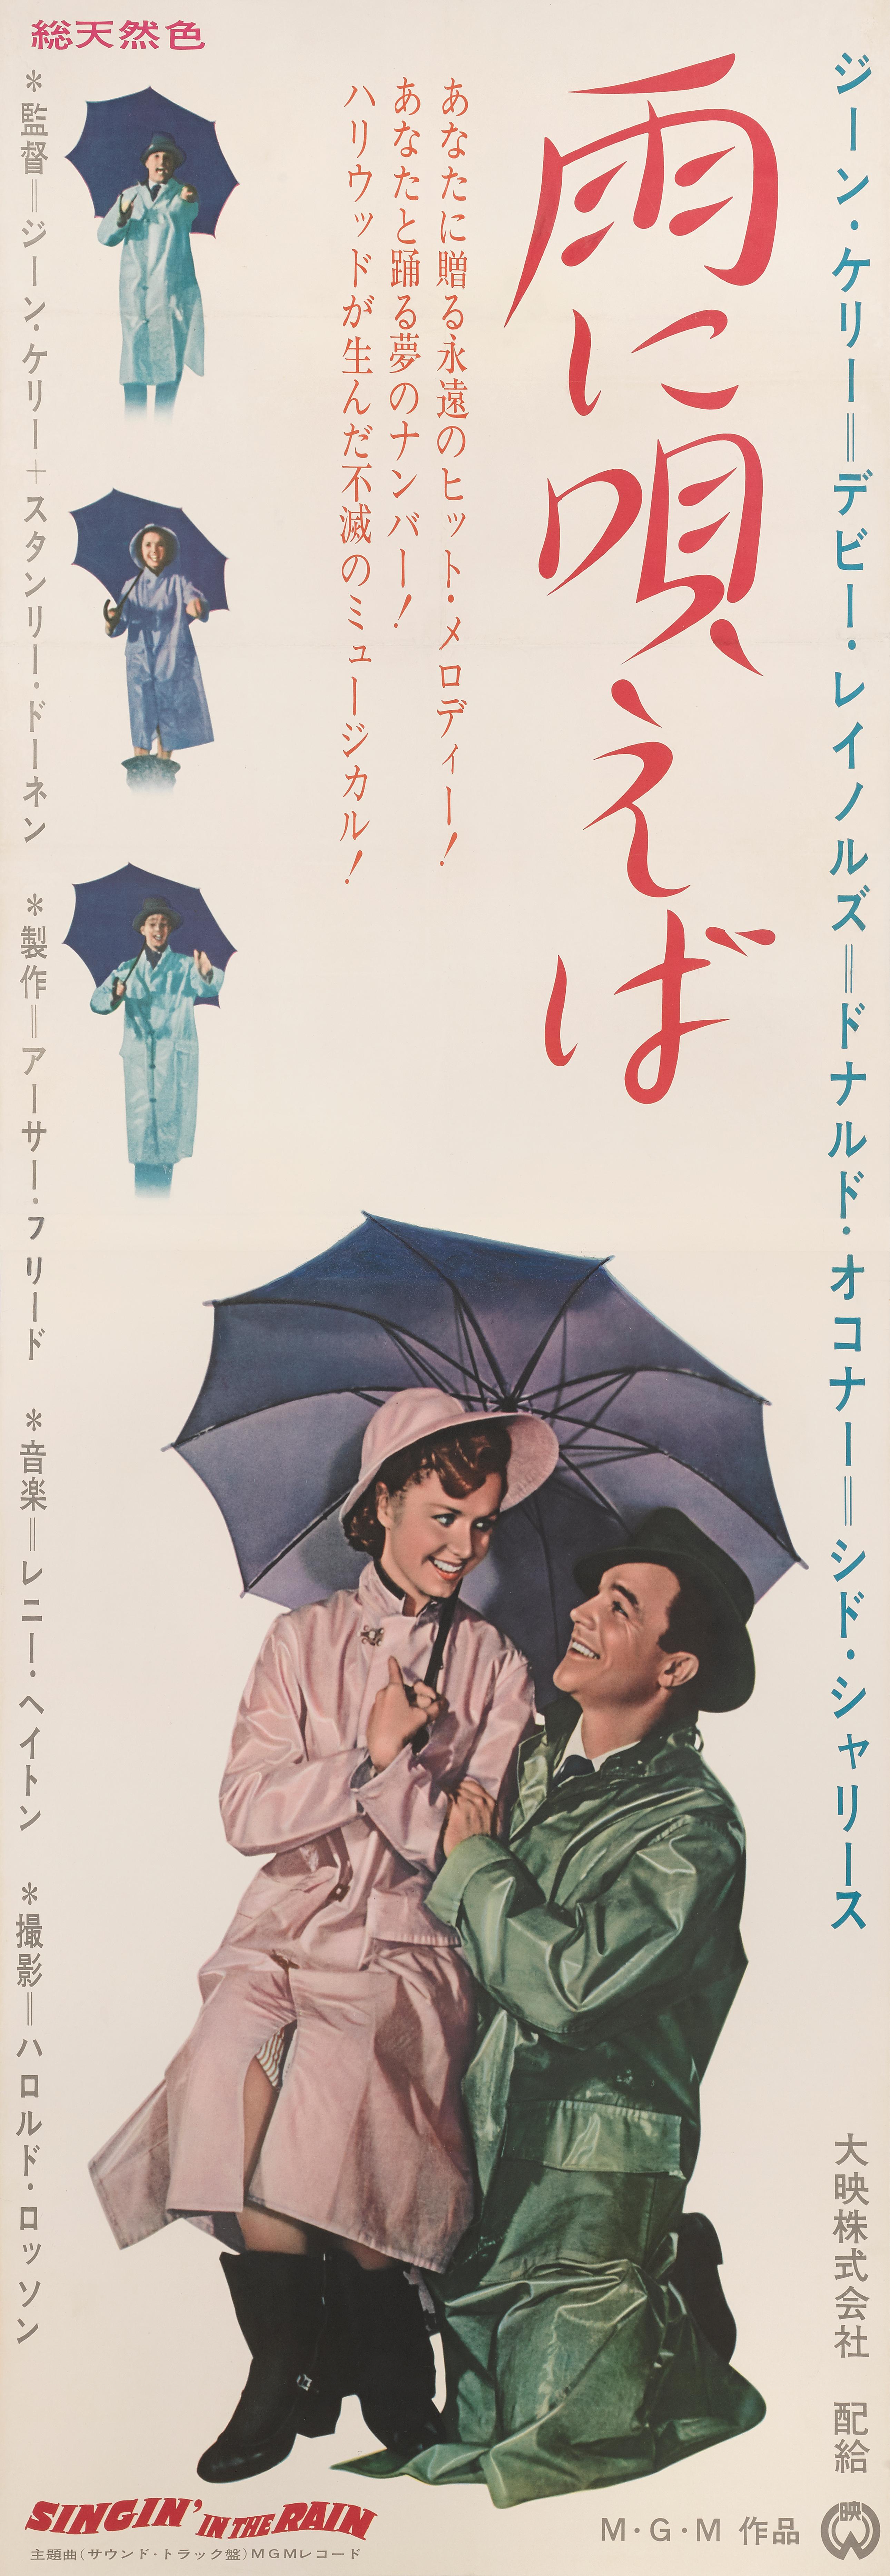 Original Japanese film poster for the Classic 1952 Musical.
This romantic comedy musical was directed and choreographed by Gene Kelly and Stanley Donen. It also stars Kelly, Donald O'Connor, and Debbie Reynolds. It shows Hollywood in the late 1920s,